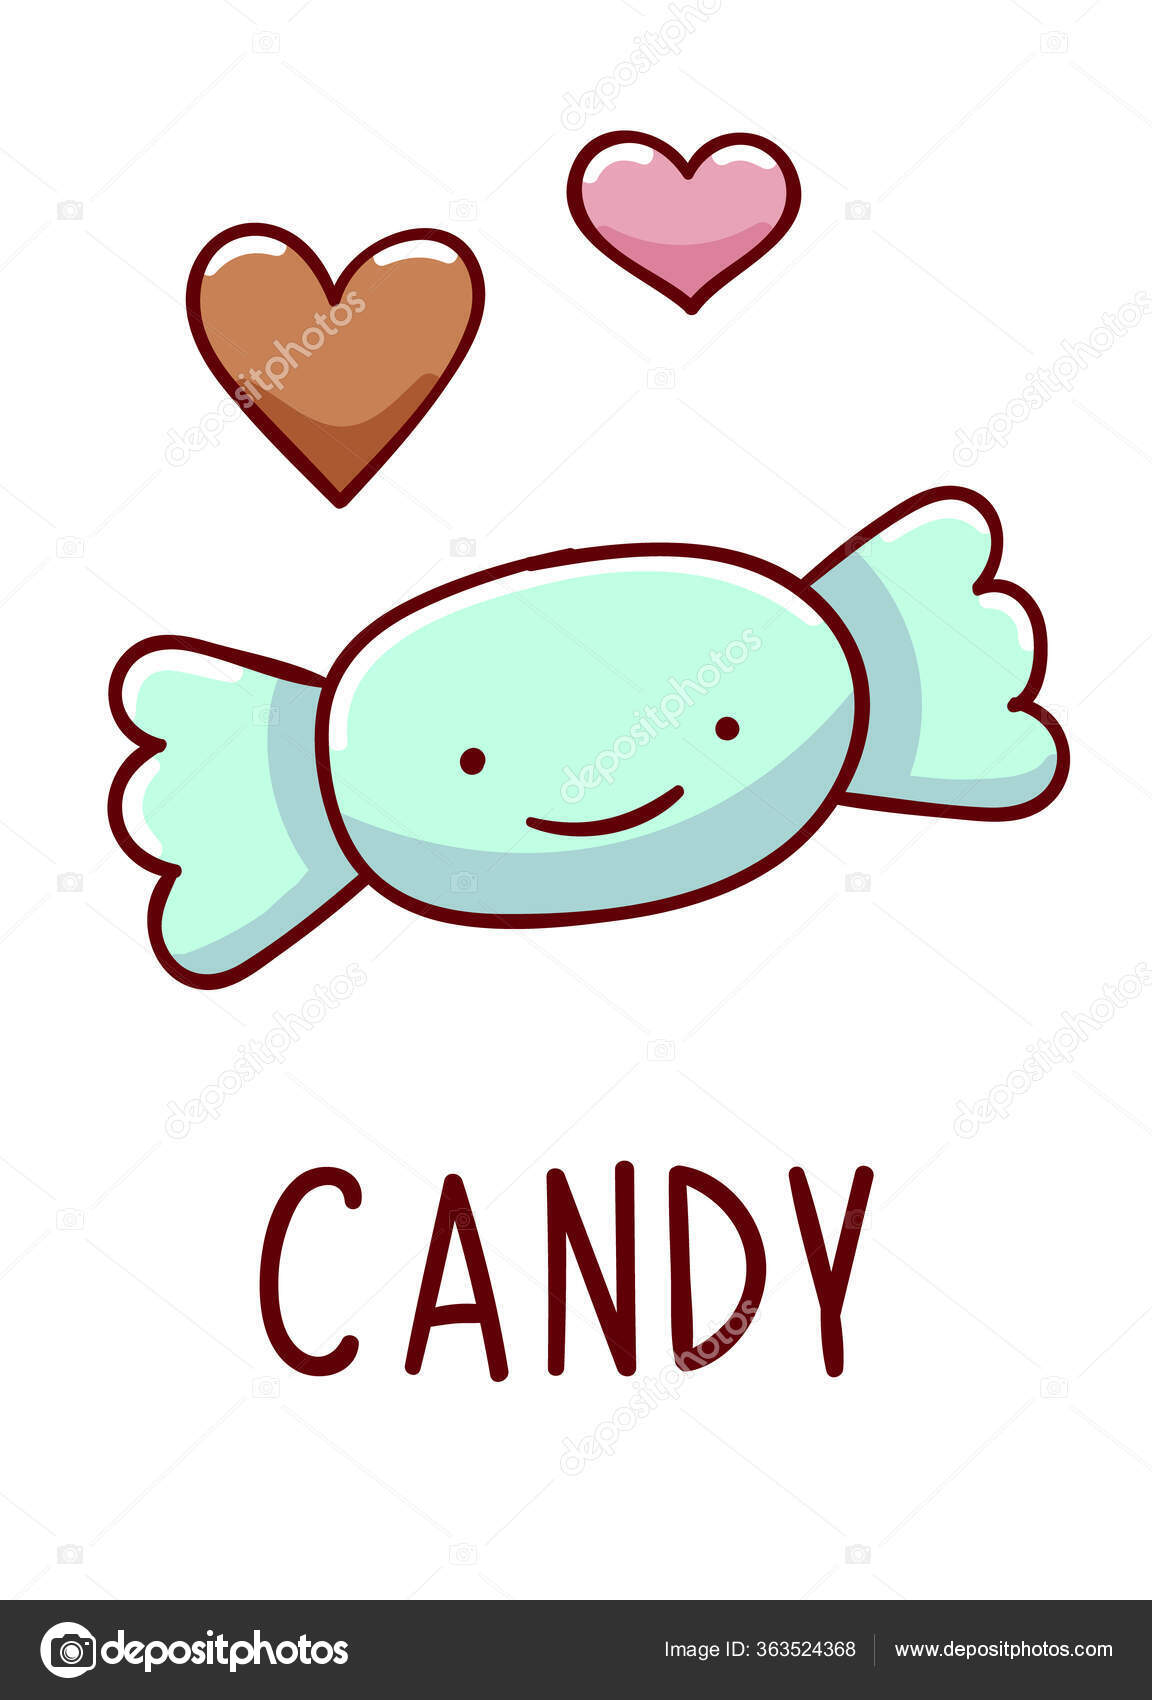 Sketch colored candies and lollipops pattern Vector Image